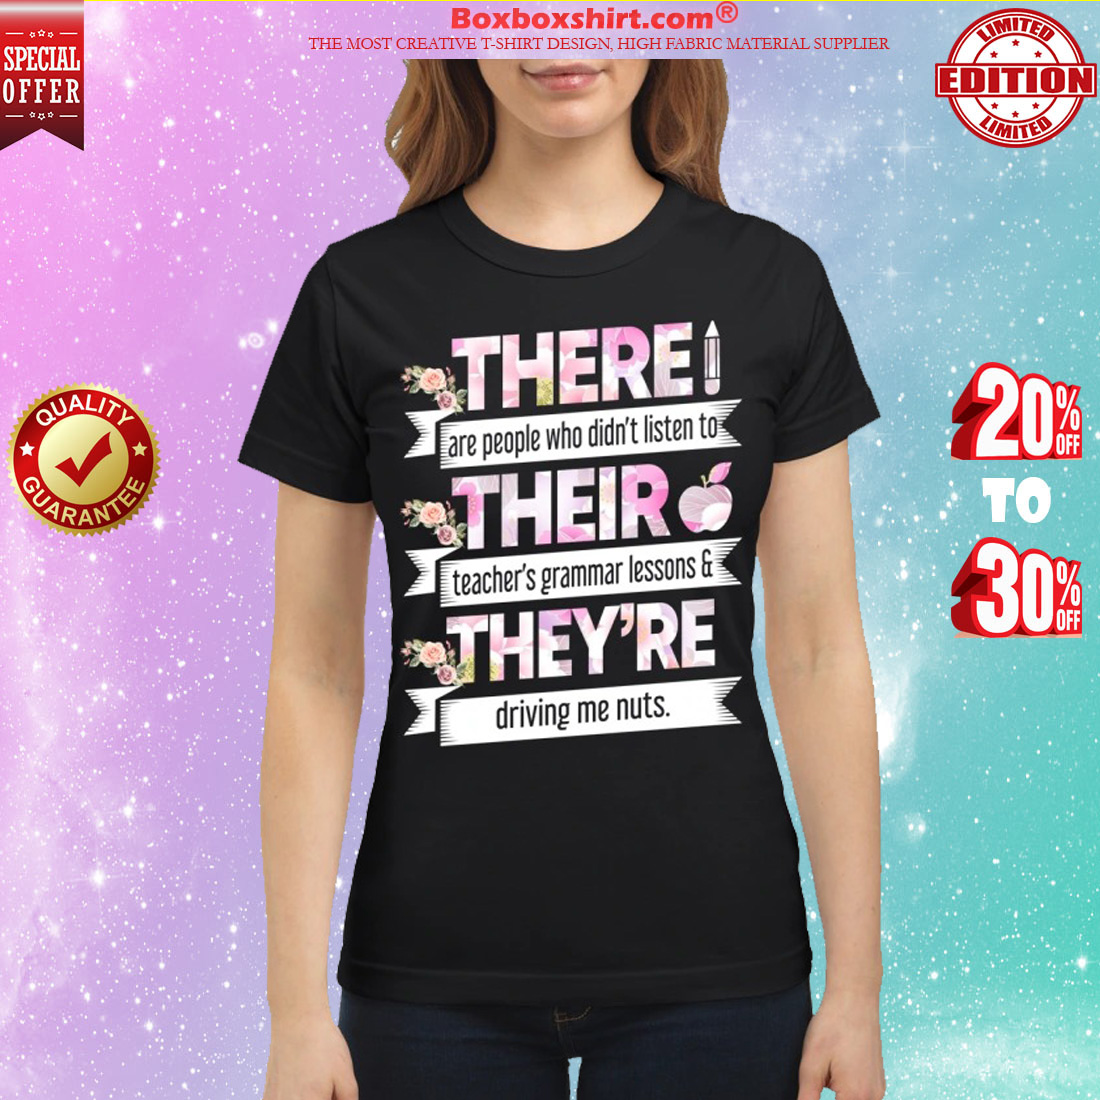 There are people who didn't listen to their teacher's grammar lessons they're driving me nuts classic shirt